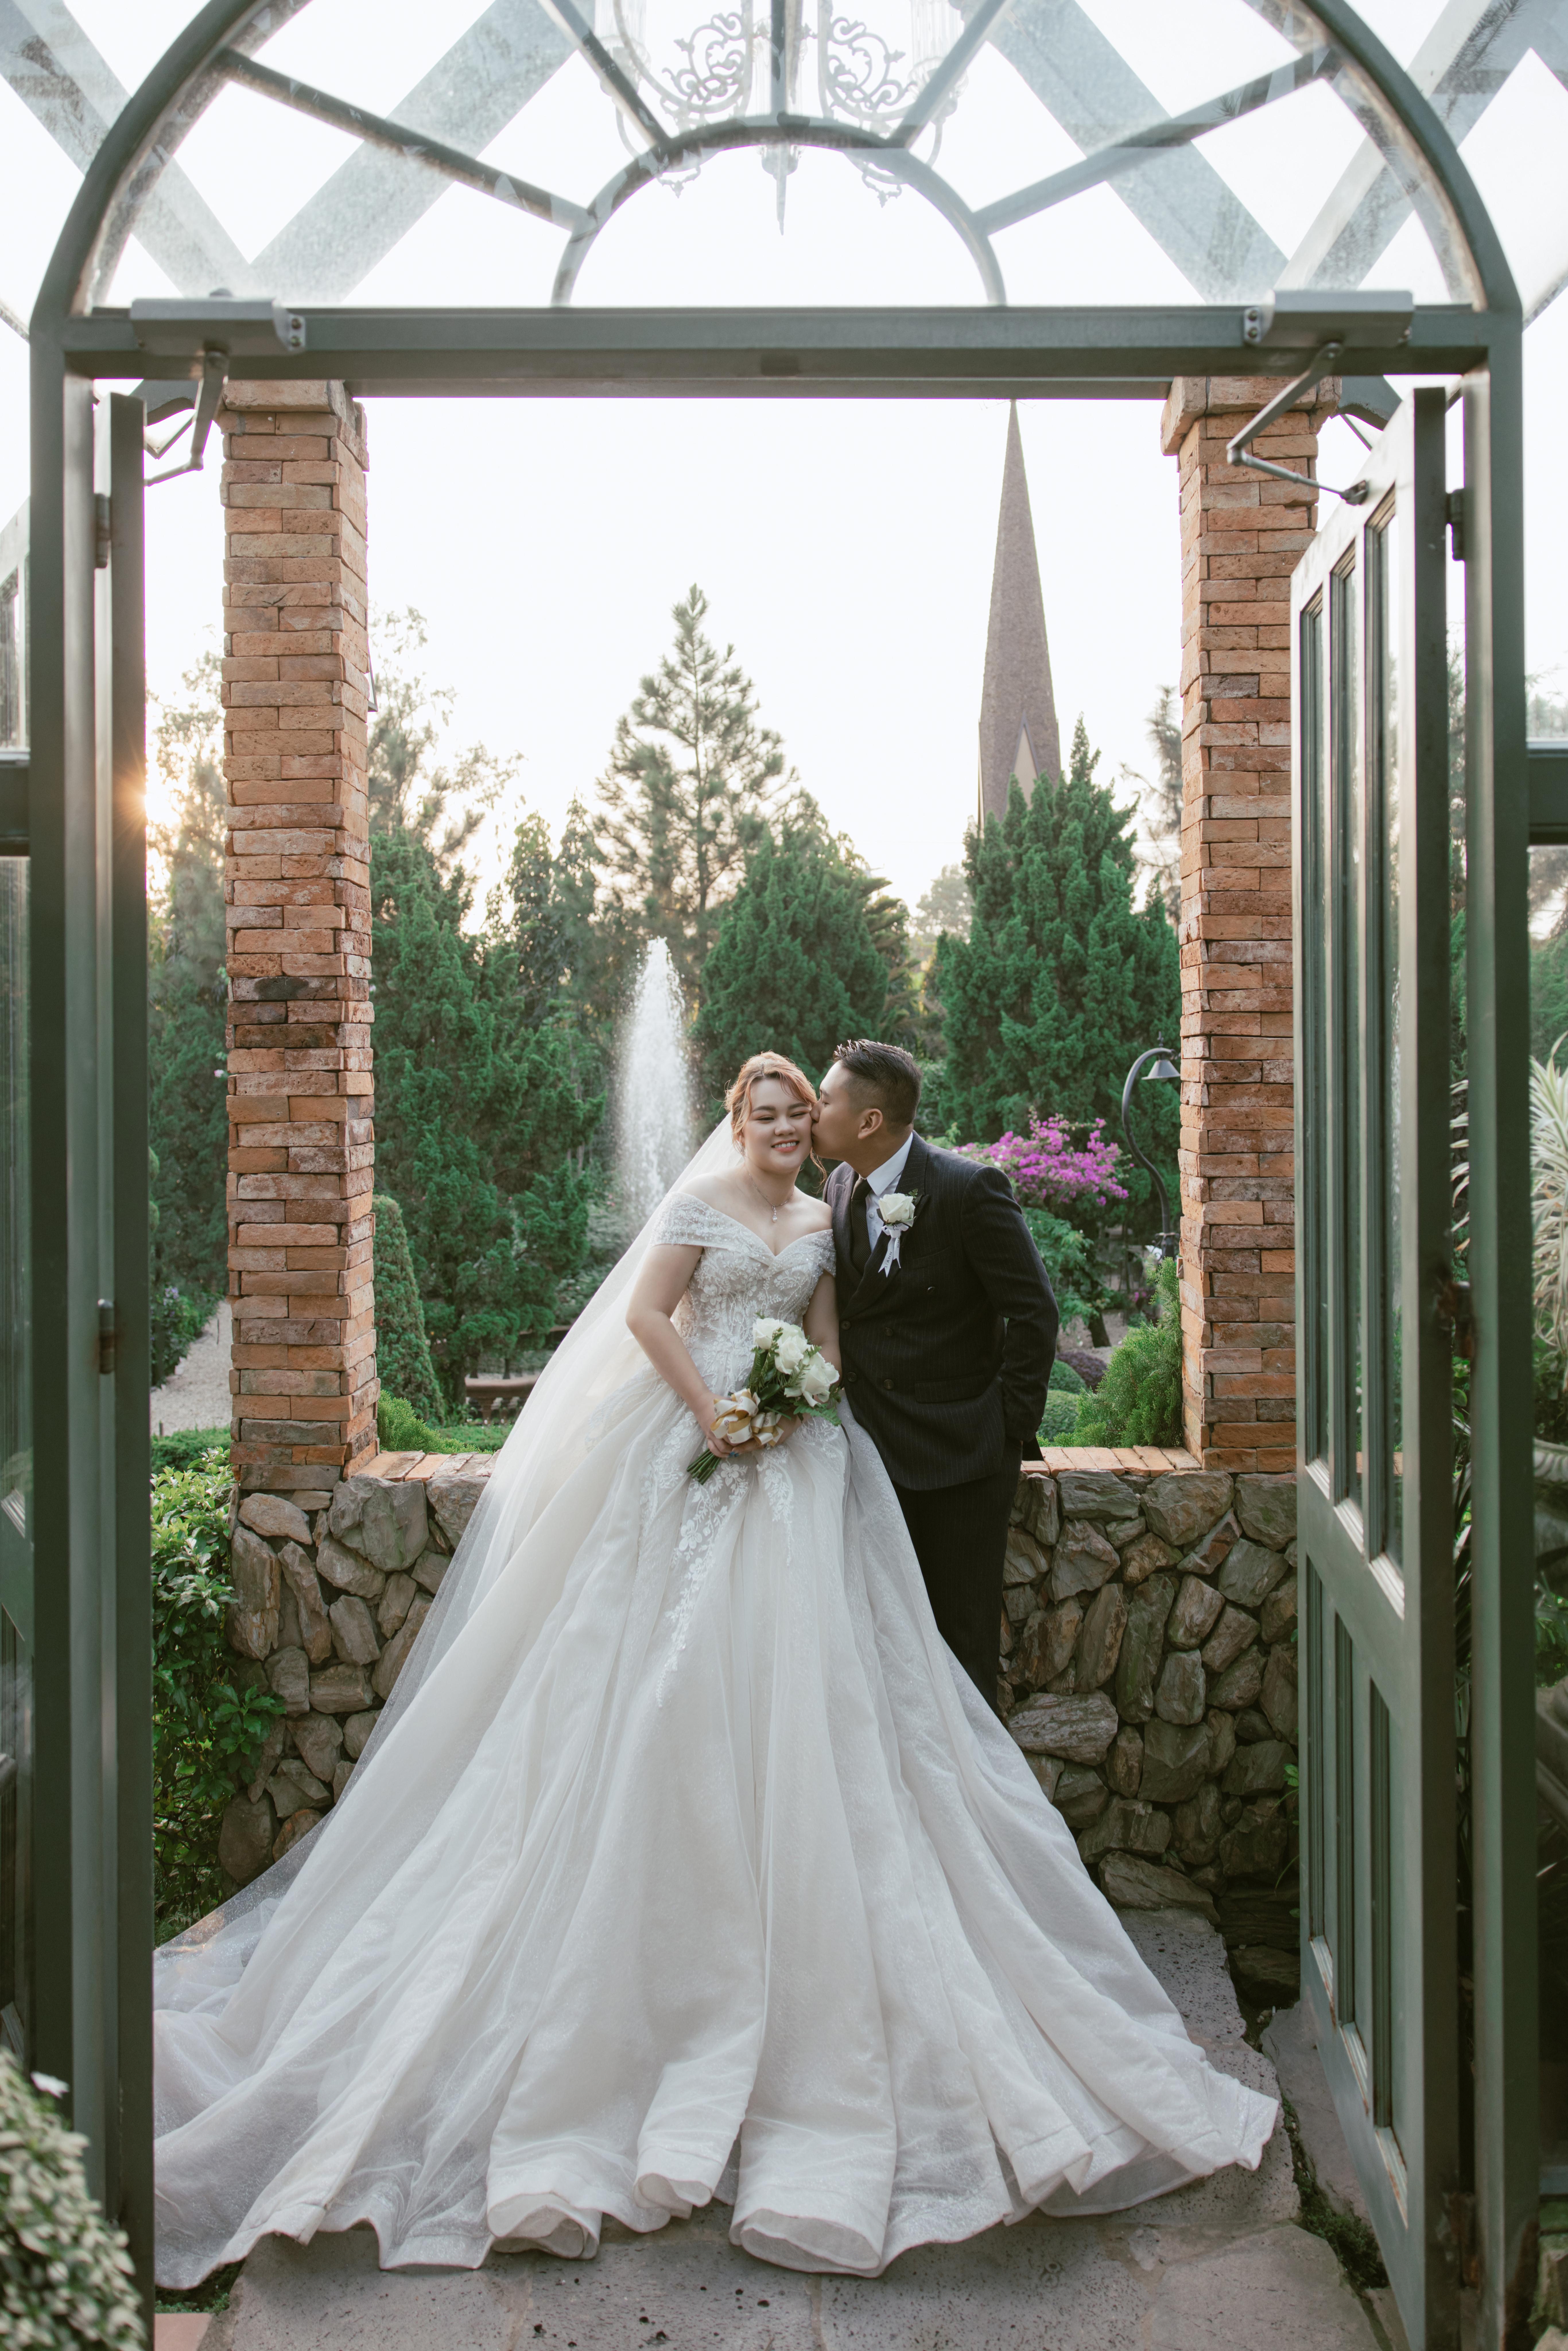 The Wedding Website of Michelle Hayes and justin nguyen